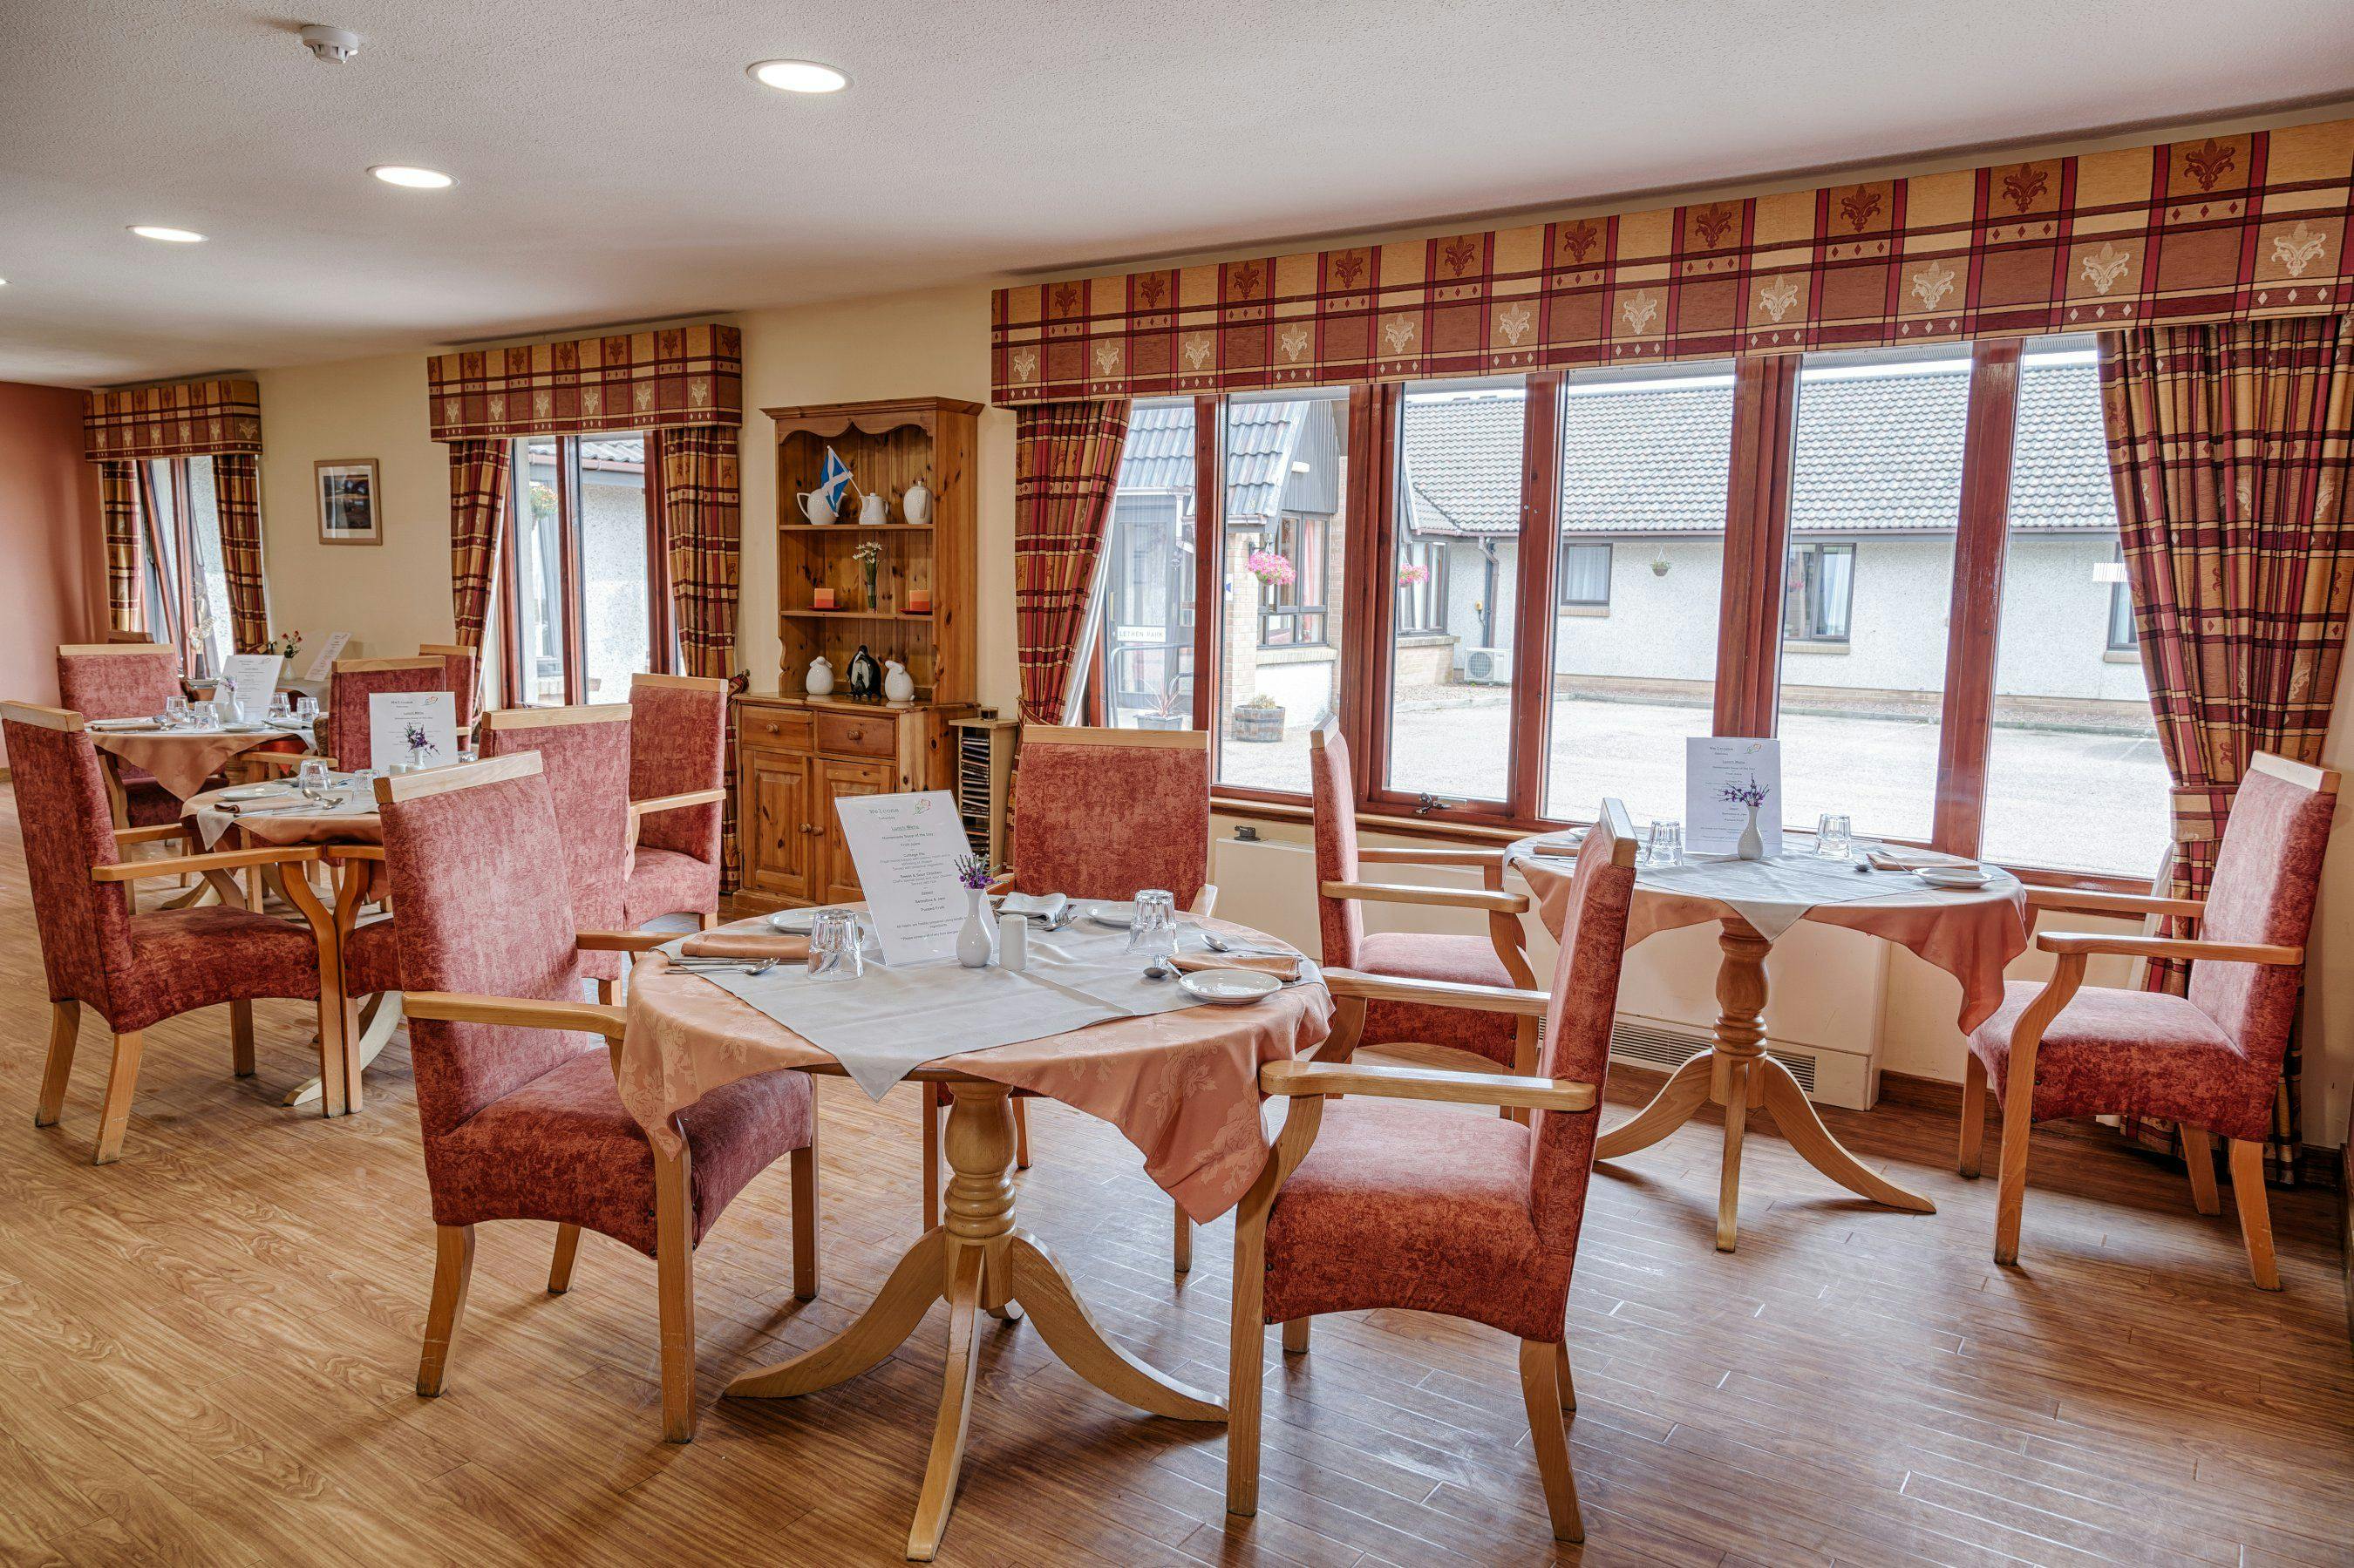 Dining Room at Lethen Park Care Home in Aberdeen, Scotland